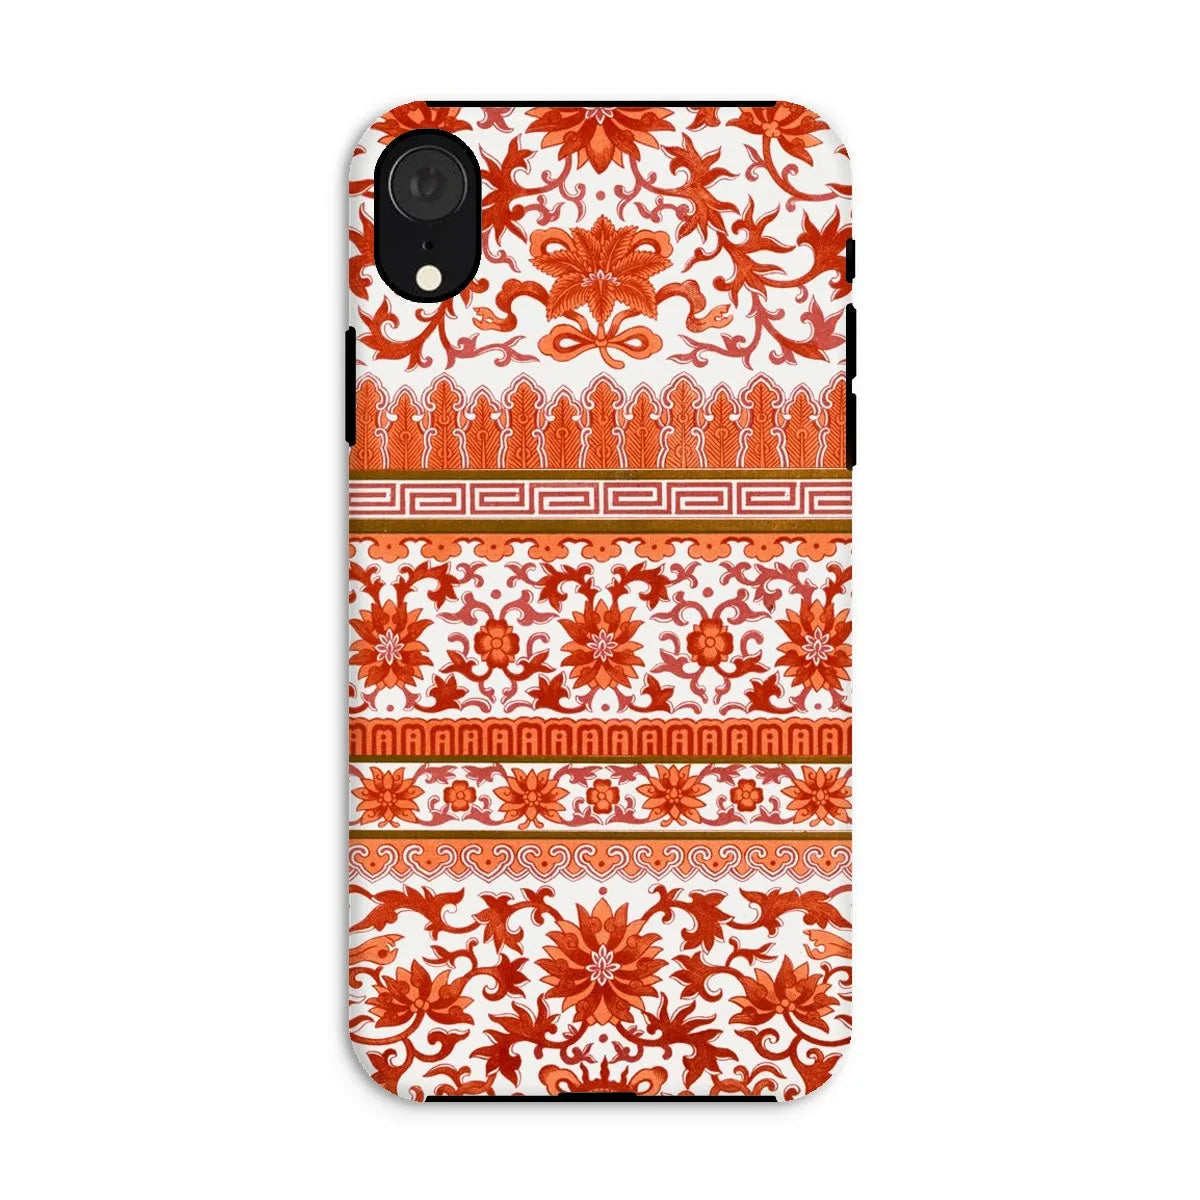 Fiery Chinese Floral Aesthetic Art Phone Case - Owen Jones - Iphone Xr / Matte - Mobile Phone Cases - Aesthetic Art